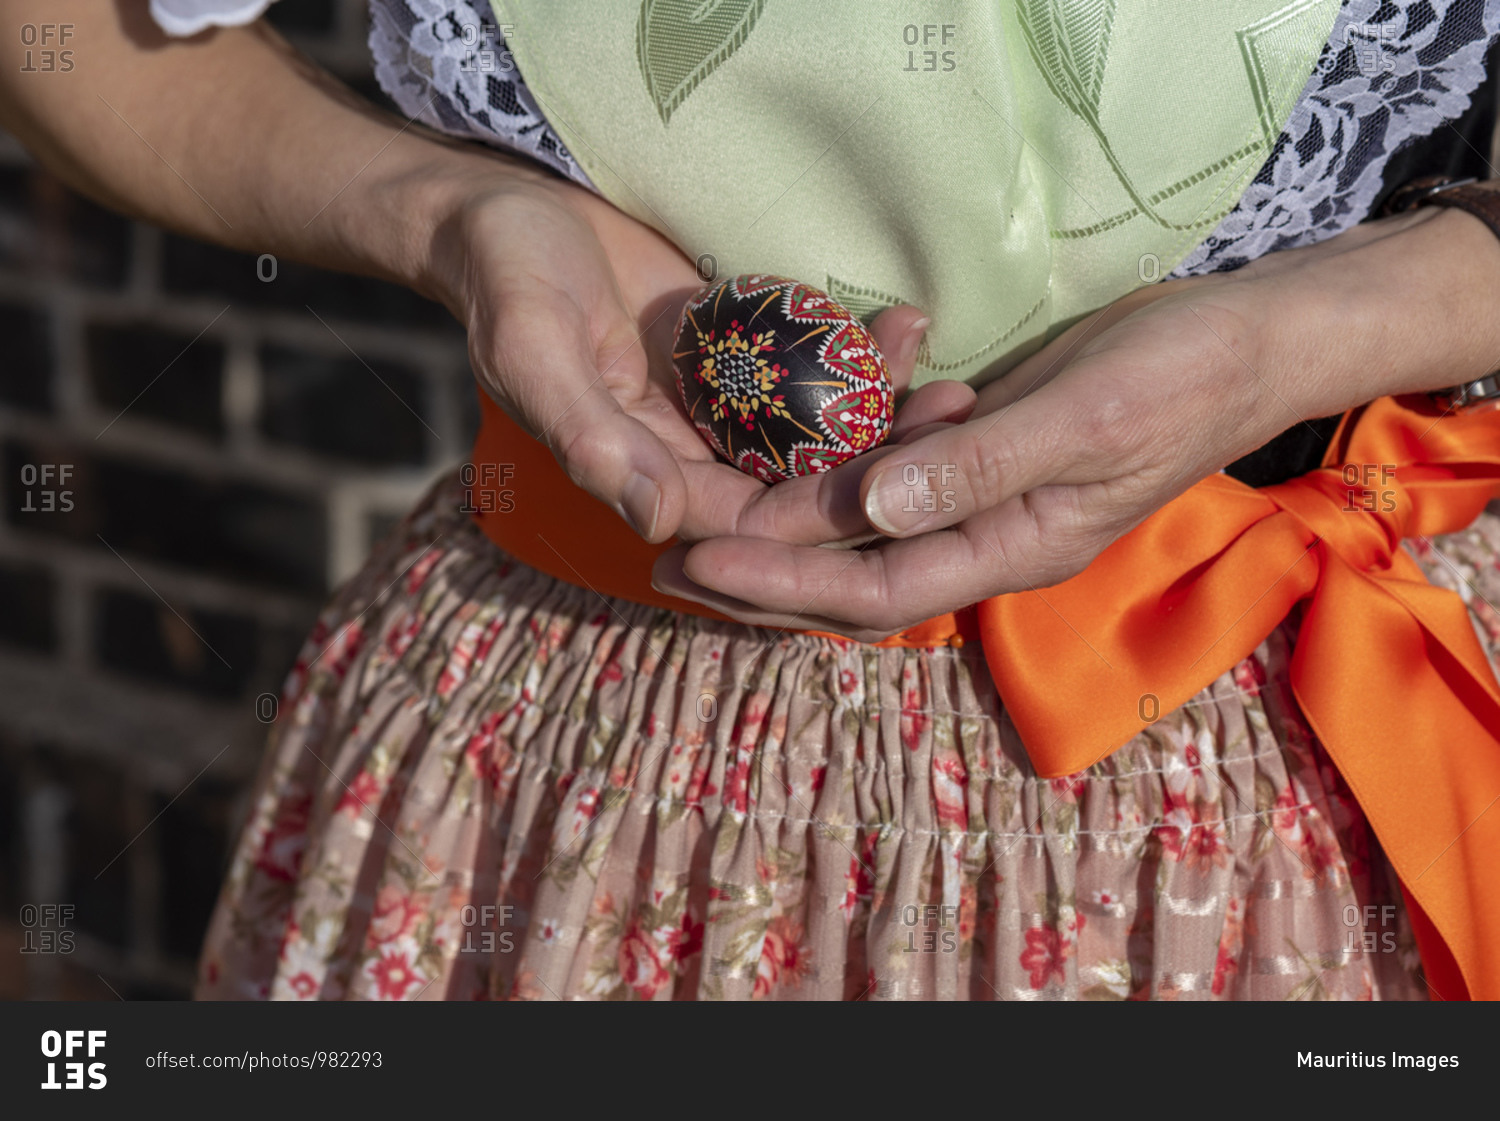 A woman wears the Sorbian costume, holding an ornamented Easter egg in her hands.